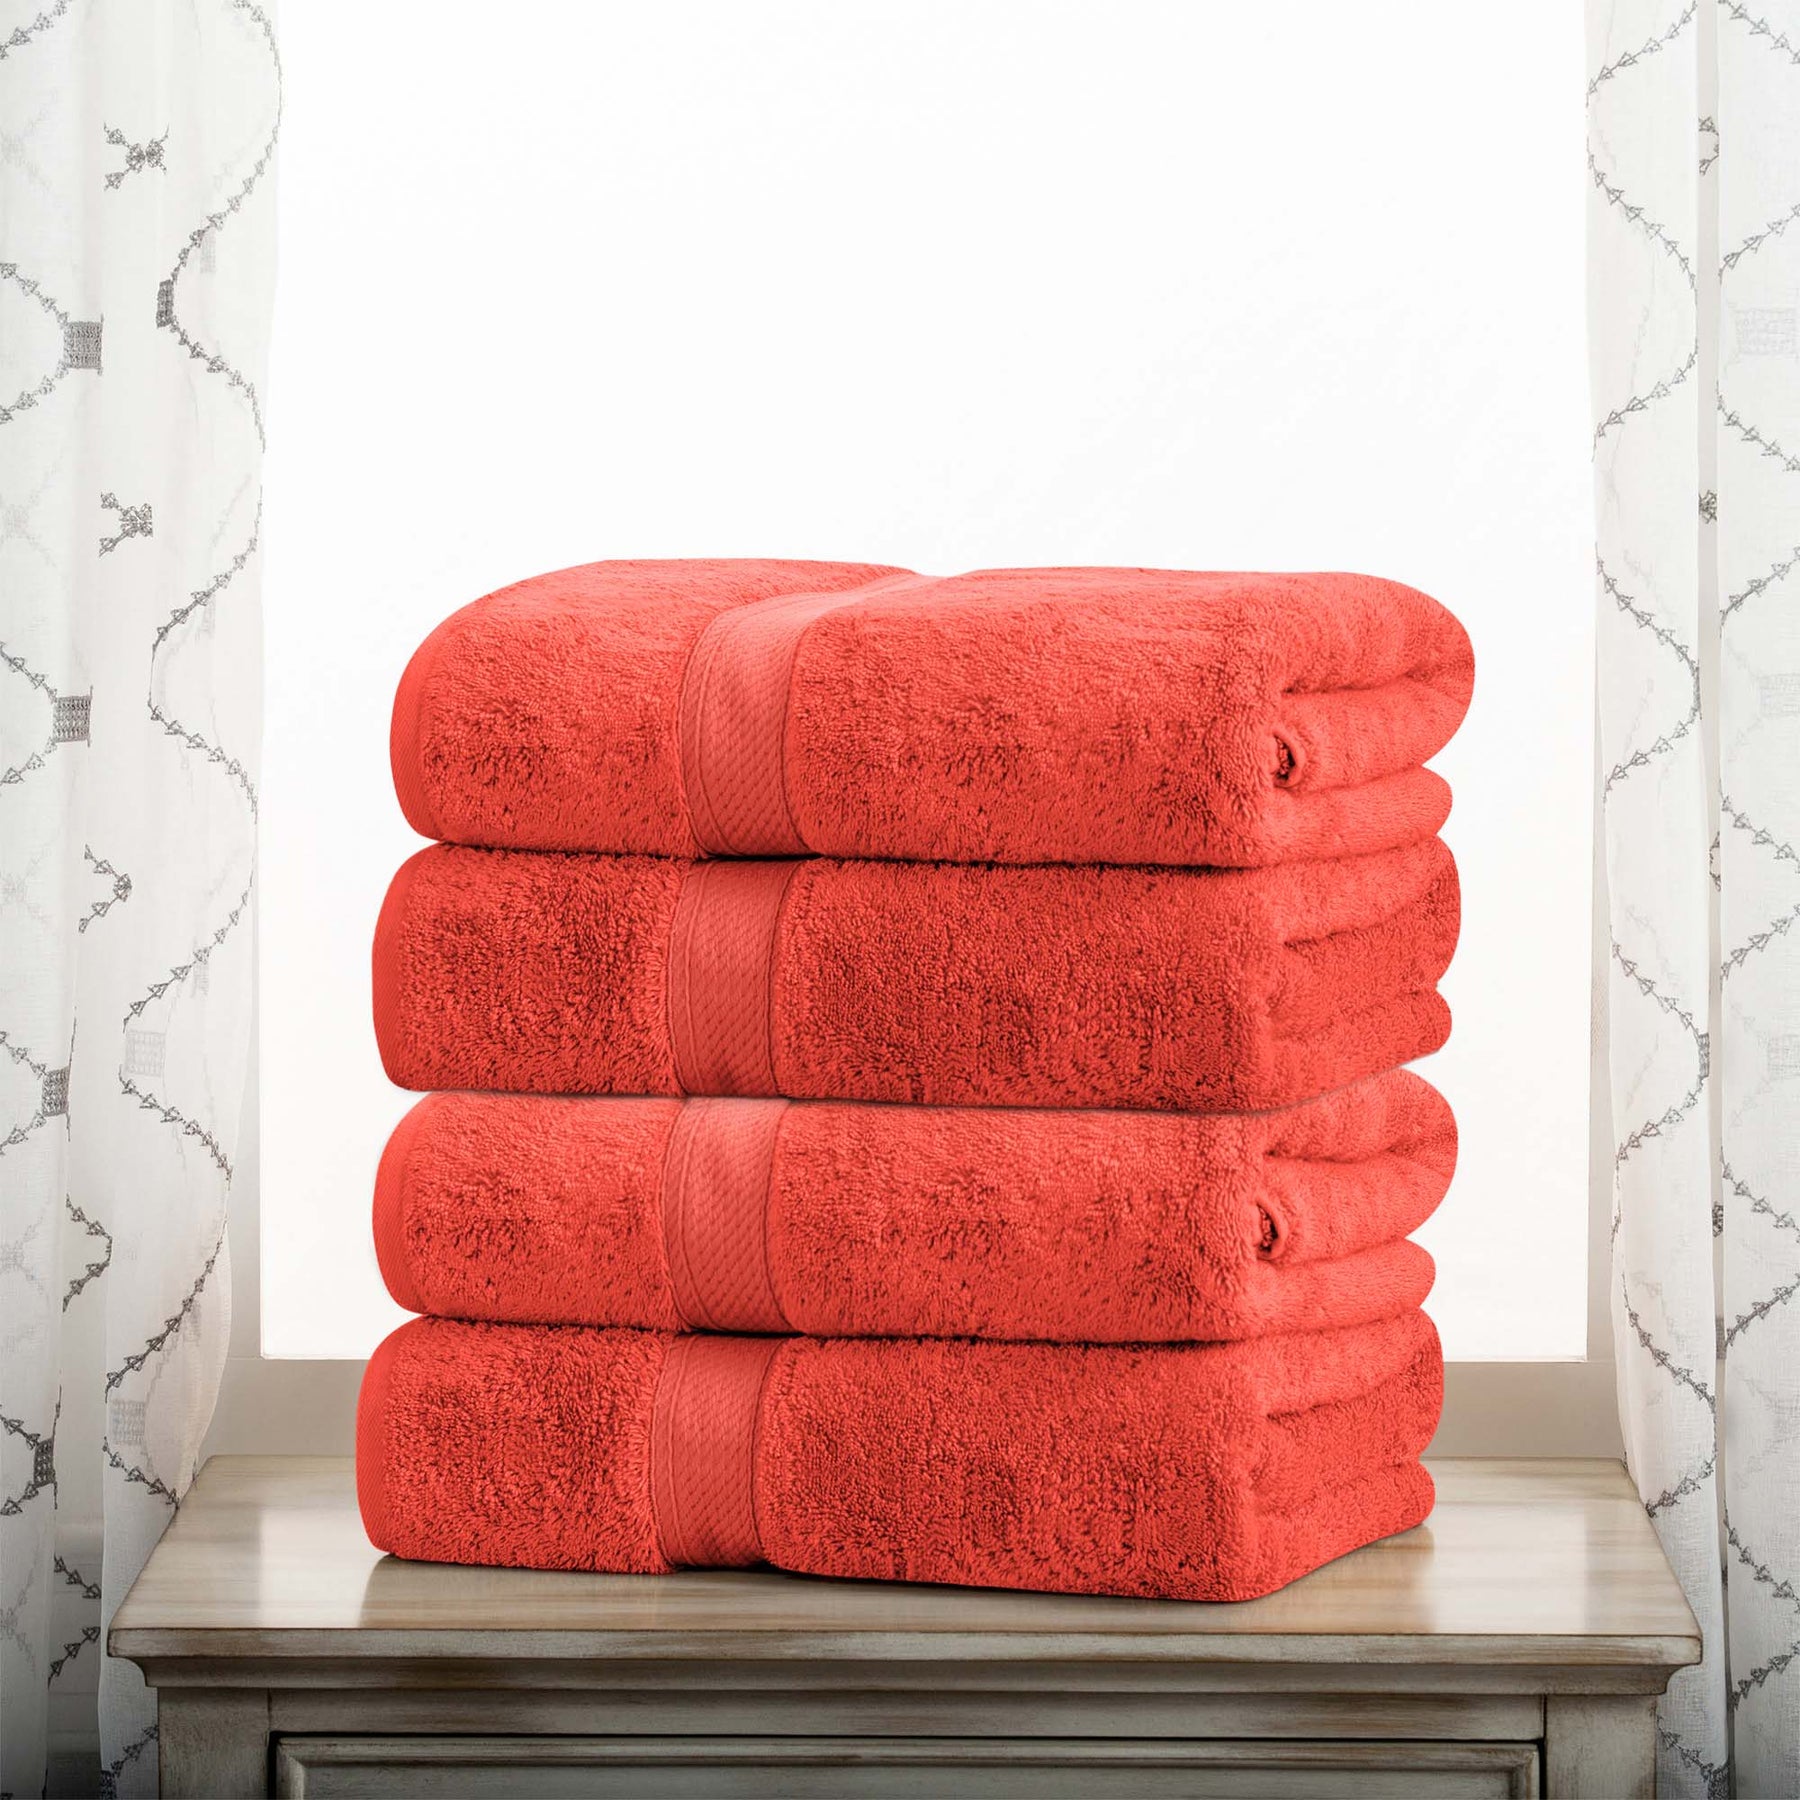 Superior Egyptian Cotton Plush Heavyweight Absorbent Luxury Soft Bath Towel - Coral